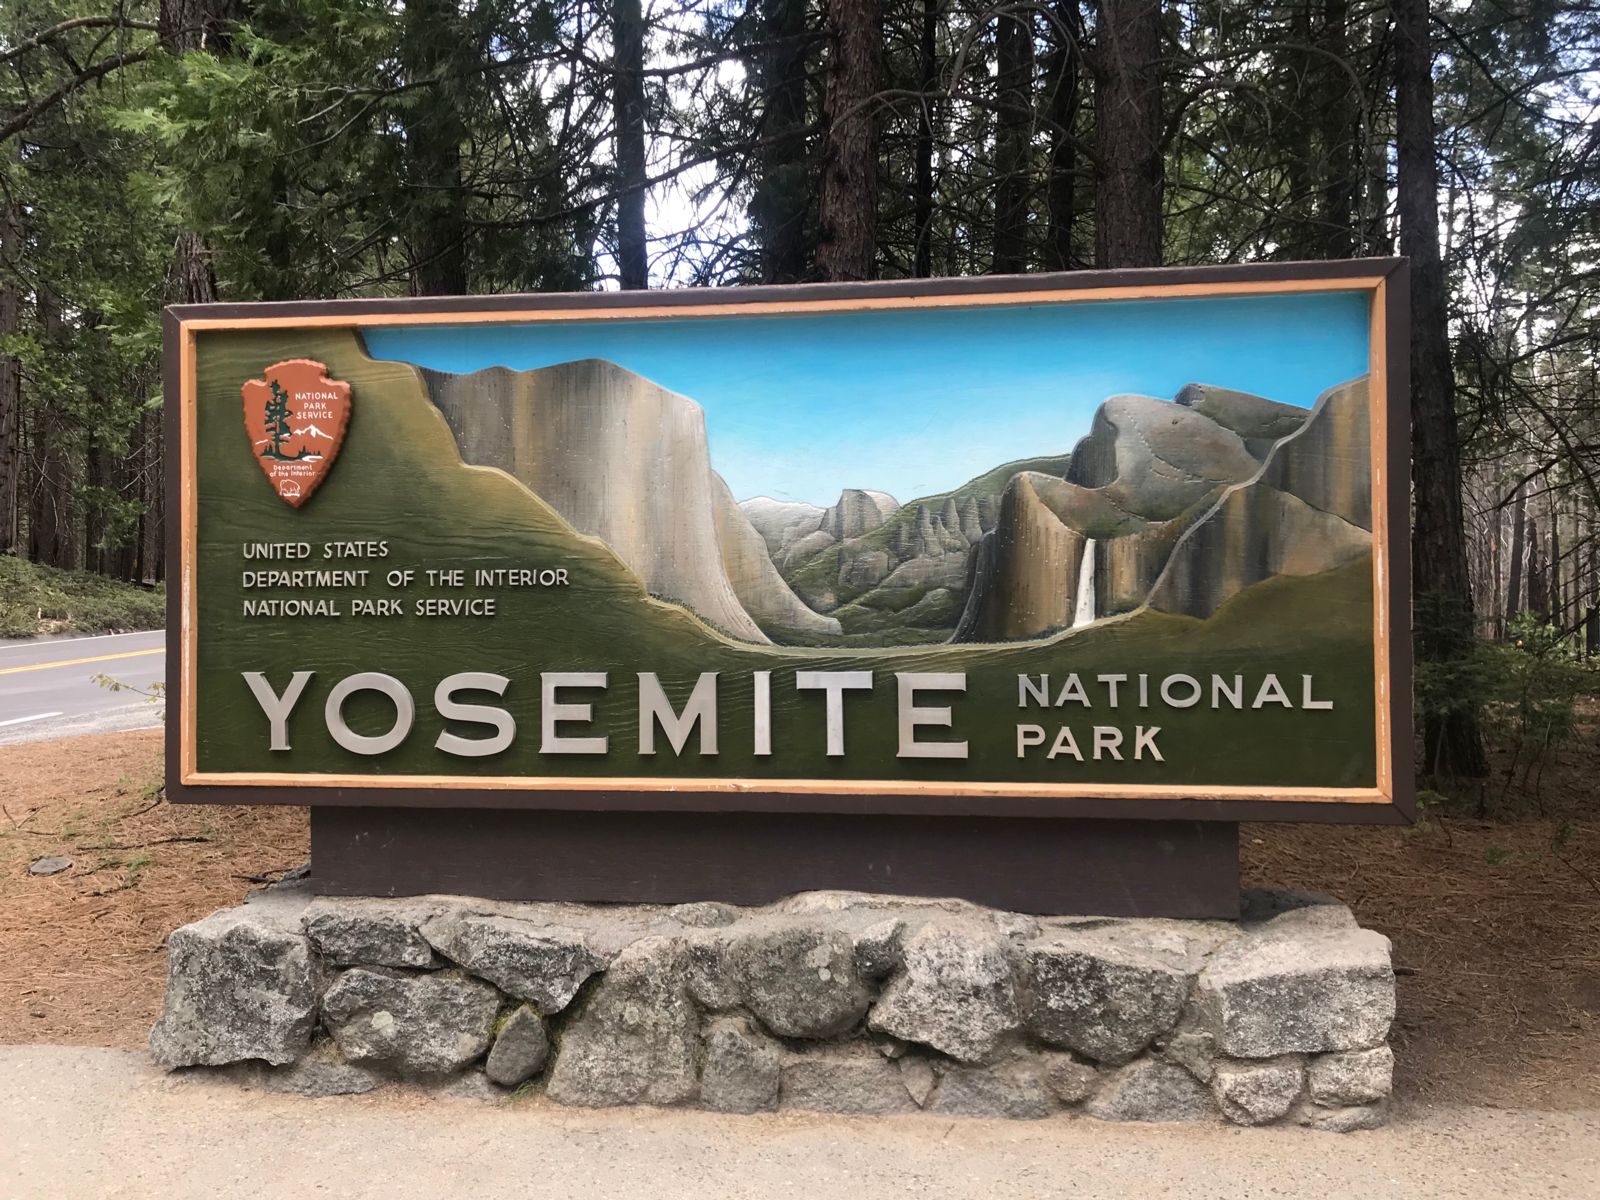 Yosemite National Park welcome sign